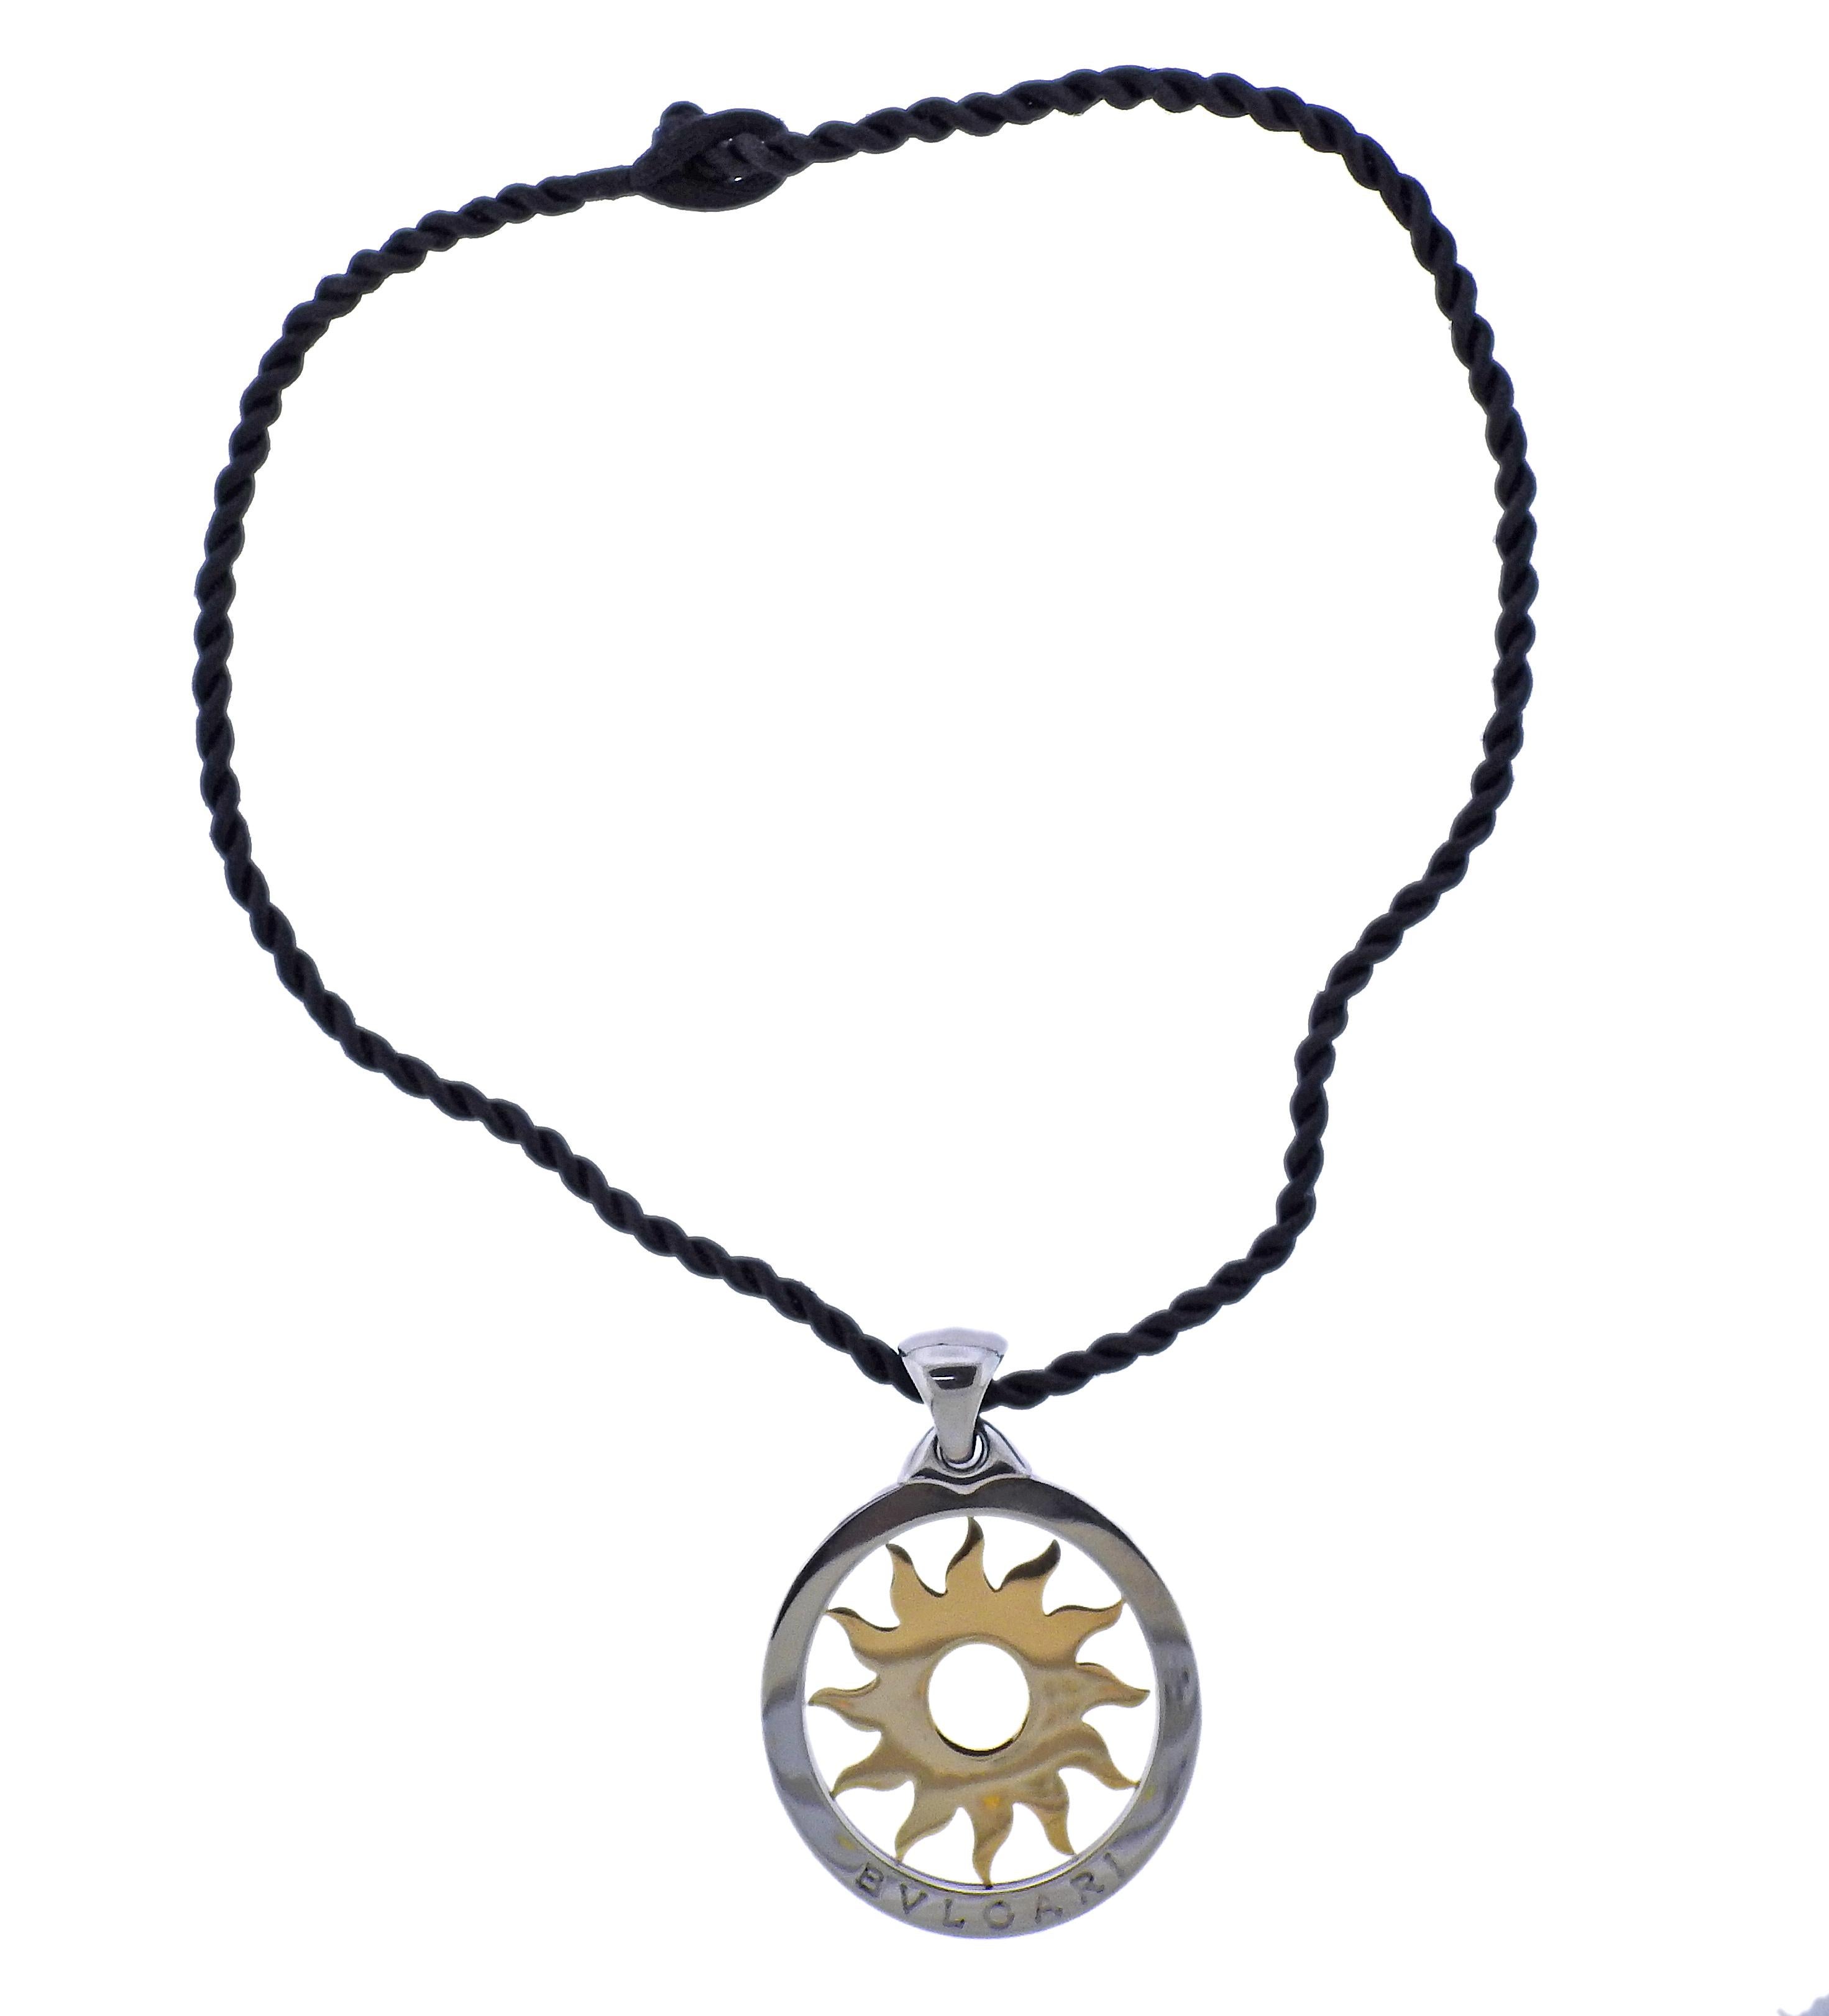 18k gold and steel large Tondo sun pendant by Bvlgari, suspended on an original cord necklace. Cord necklace is 18